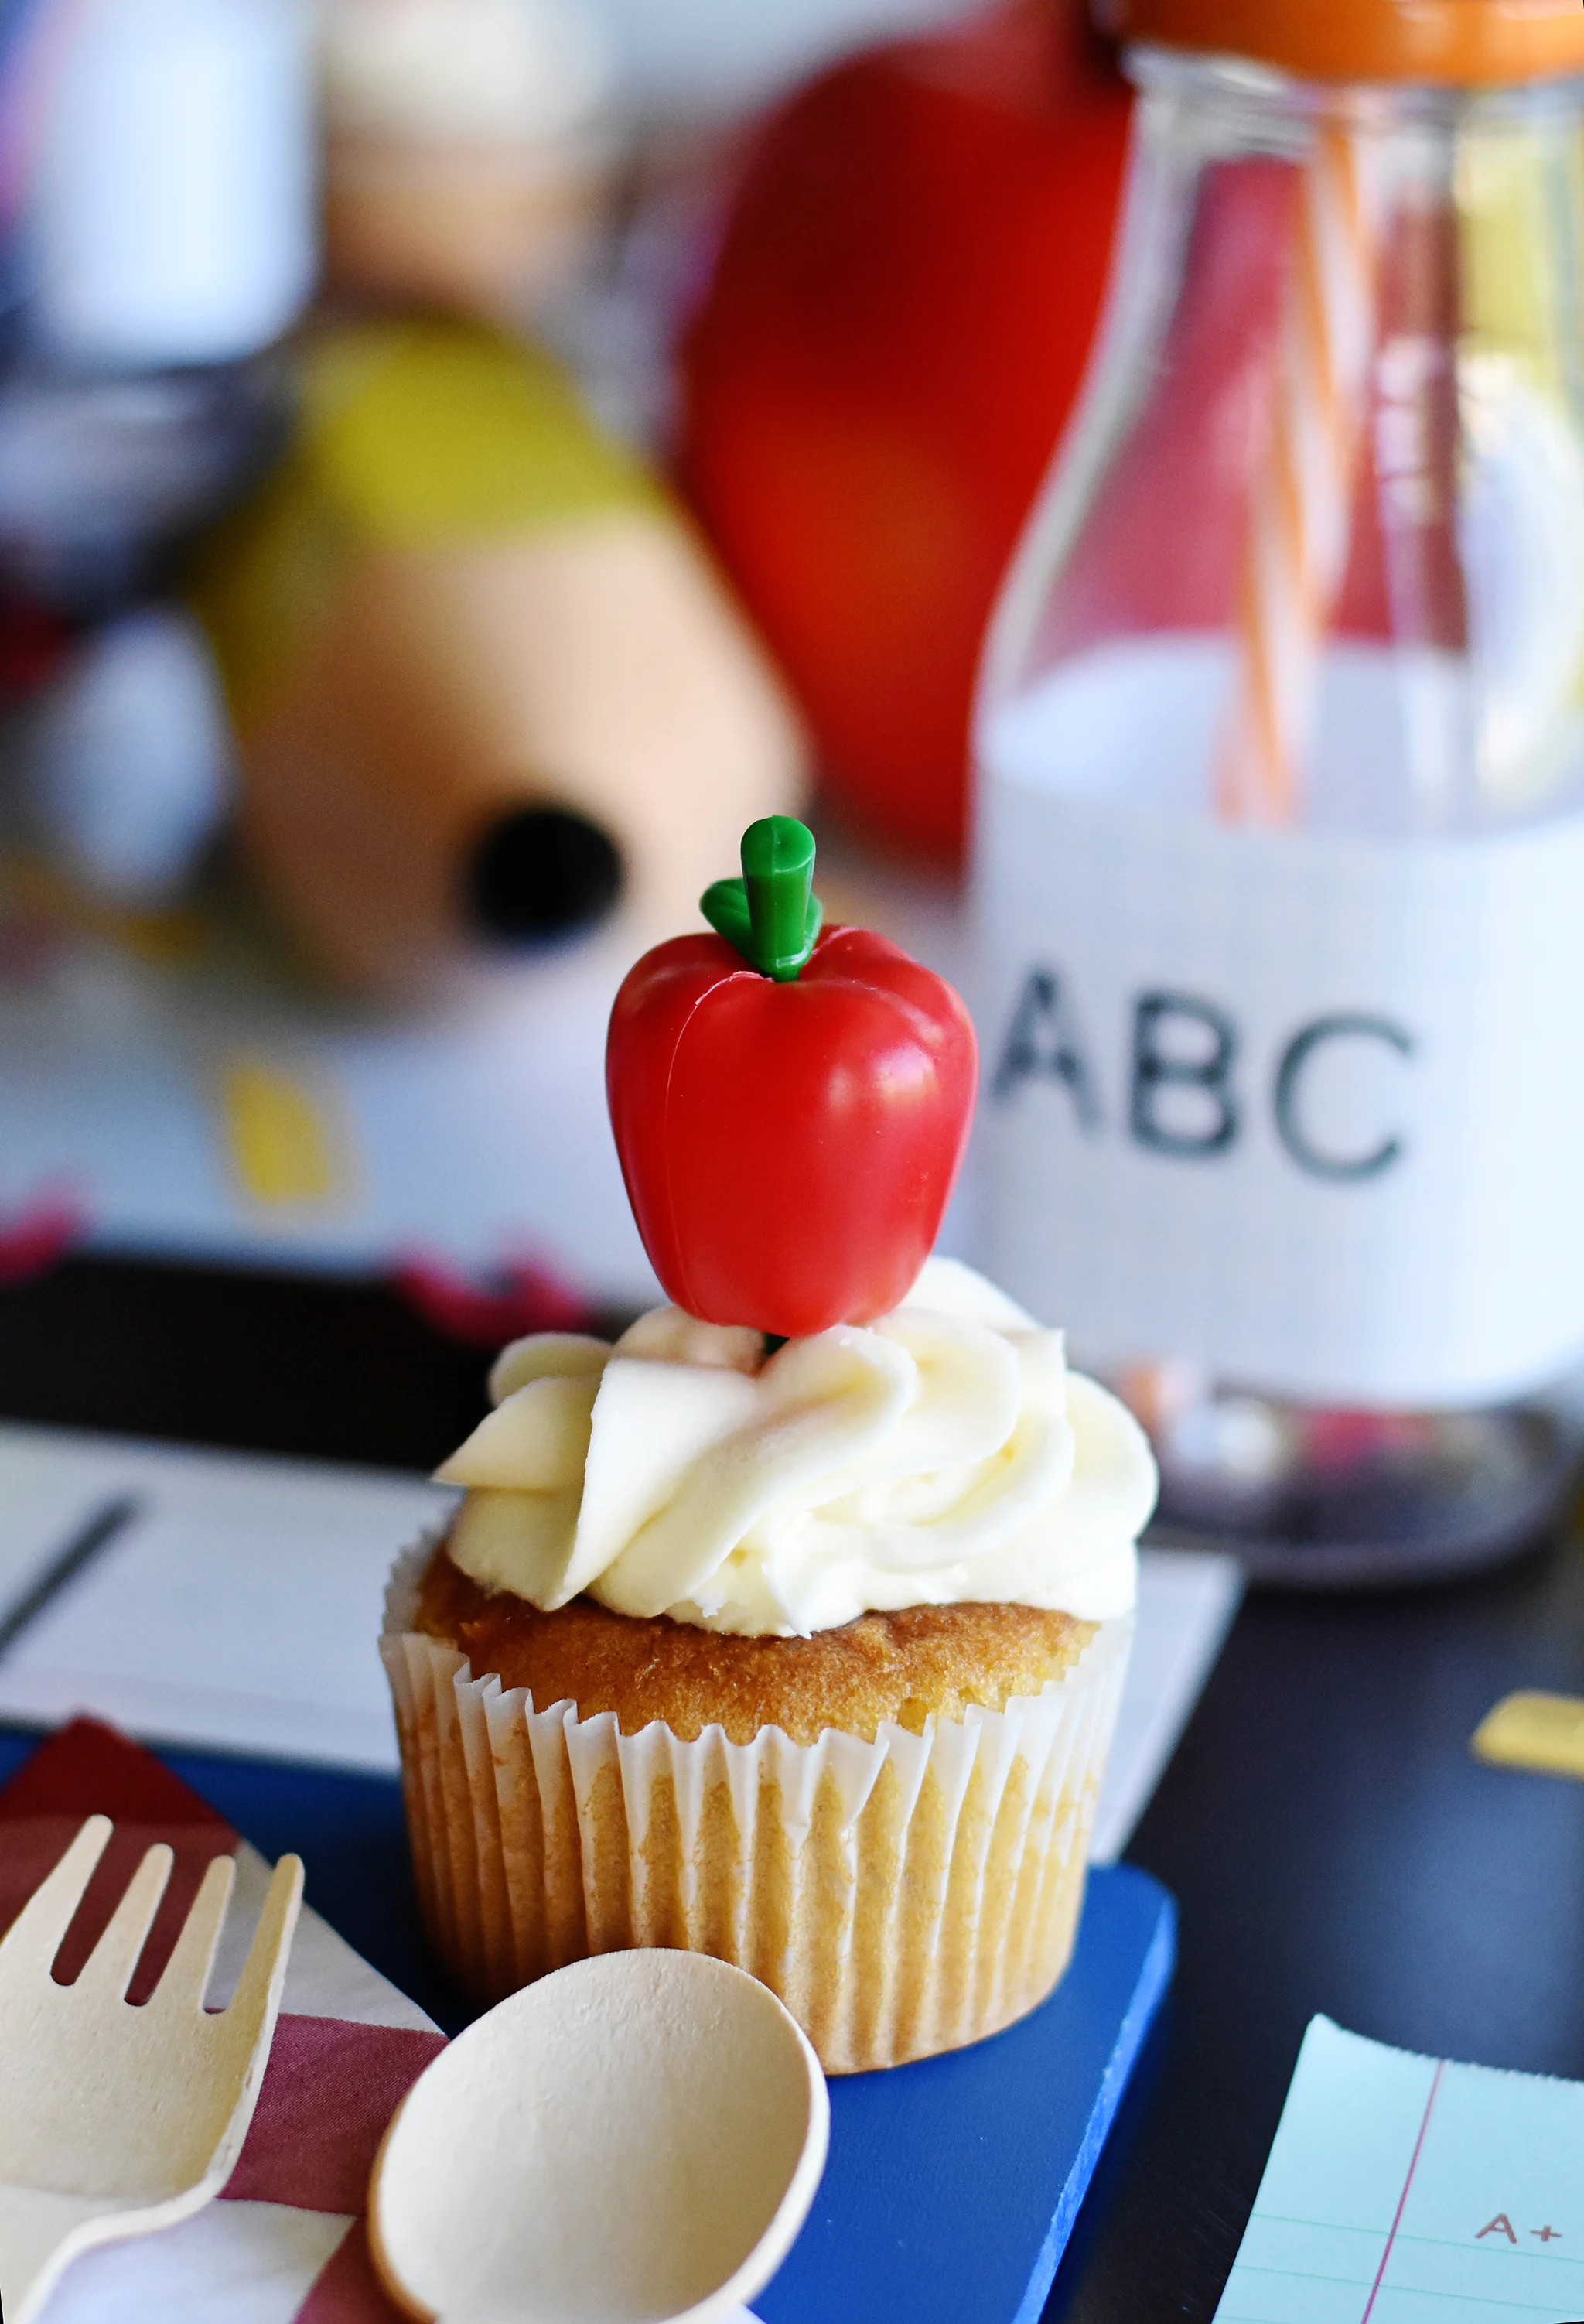 Apple Cupcake Toppers